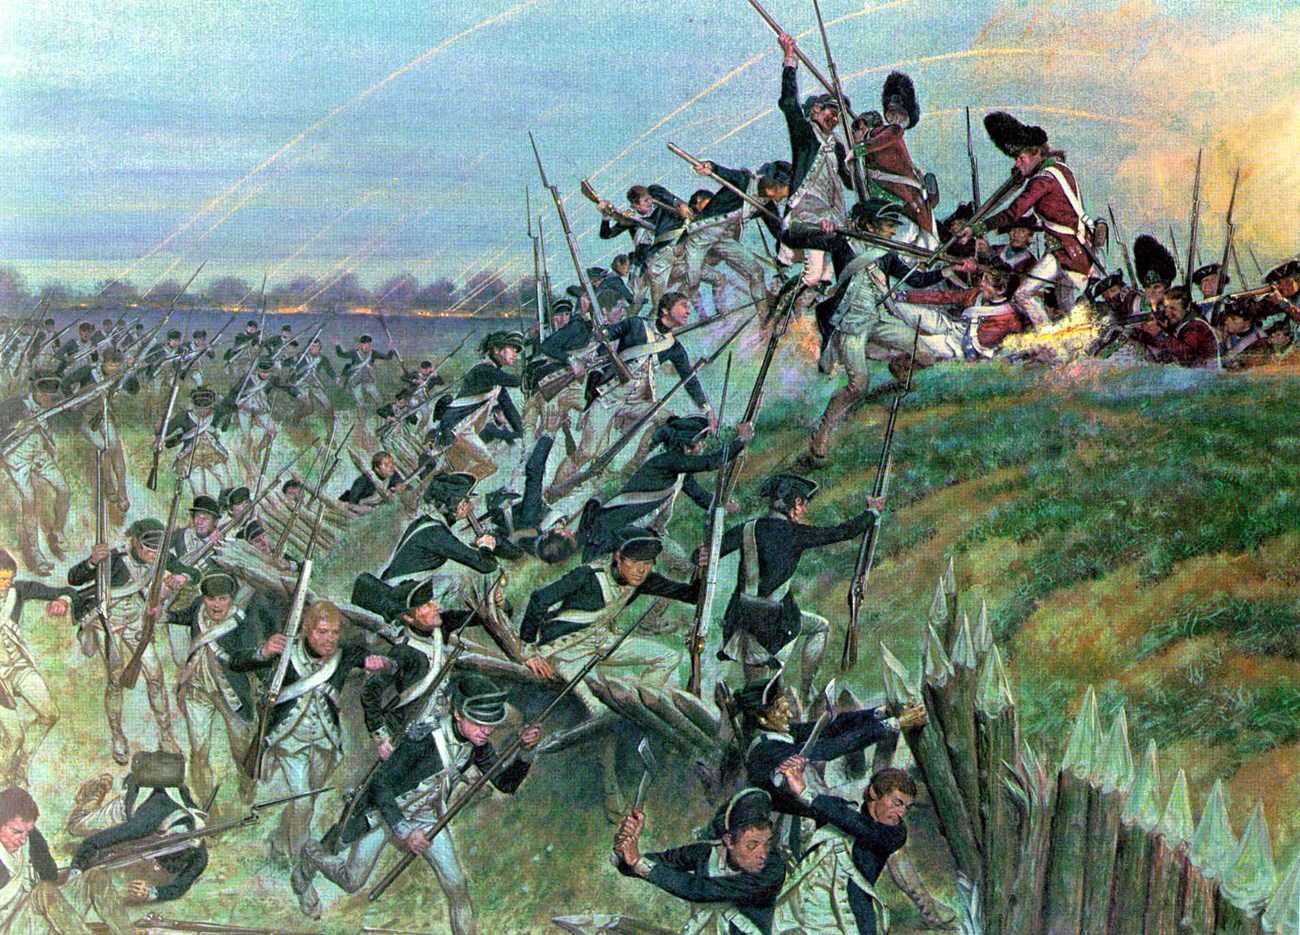 An illustration of two Revolutionary war armies converging in battle on a rural landscape,